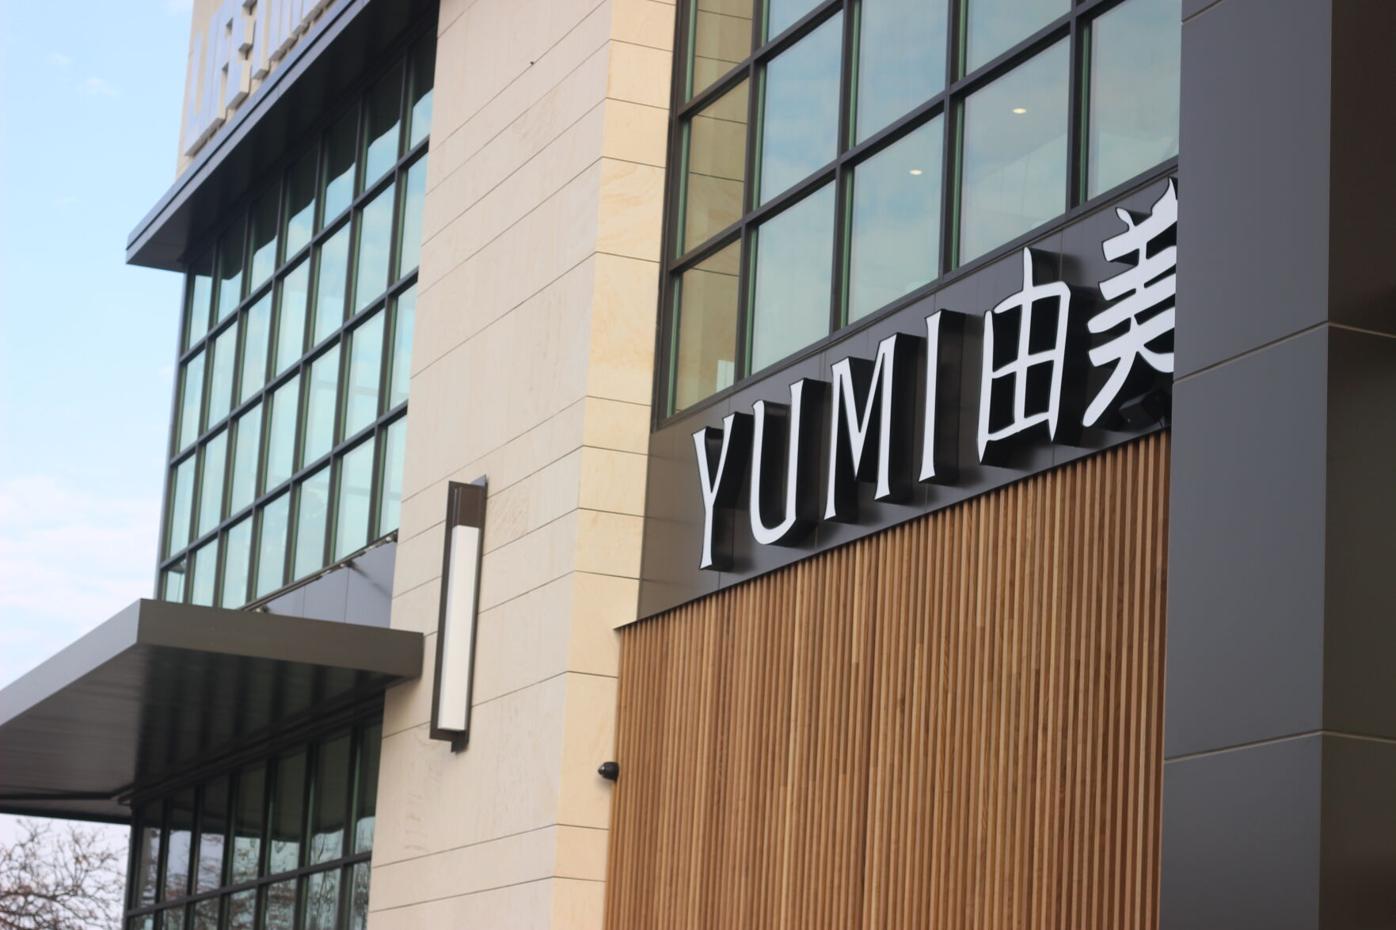 Japanese Eatery Yumi Sushi To Open At Southdale Center Edina Hometownsource Com - Yumi Restaurant Luxembourg